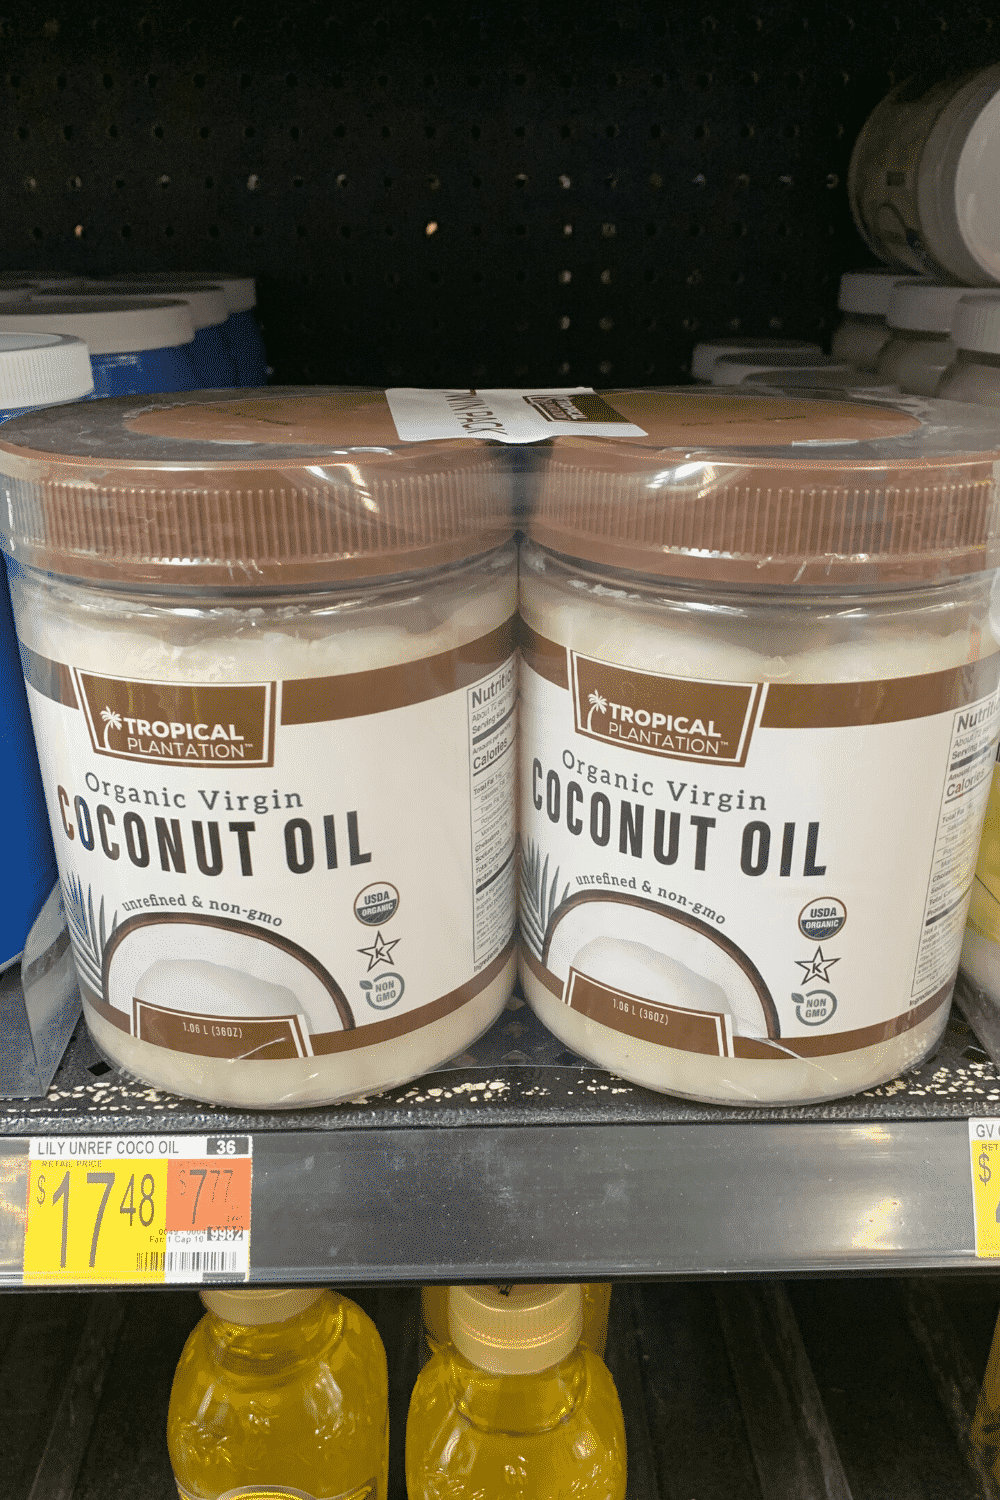 Tropical plantation organic virgin coconut oil to pack on a grocery store shelf at Walmart.